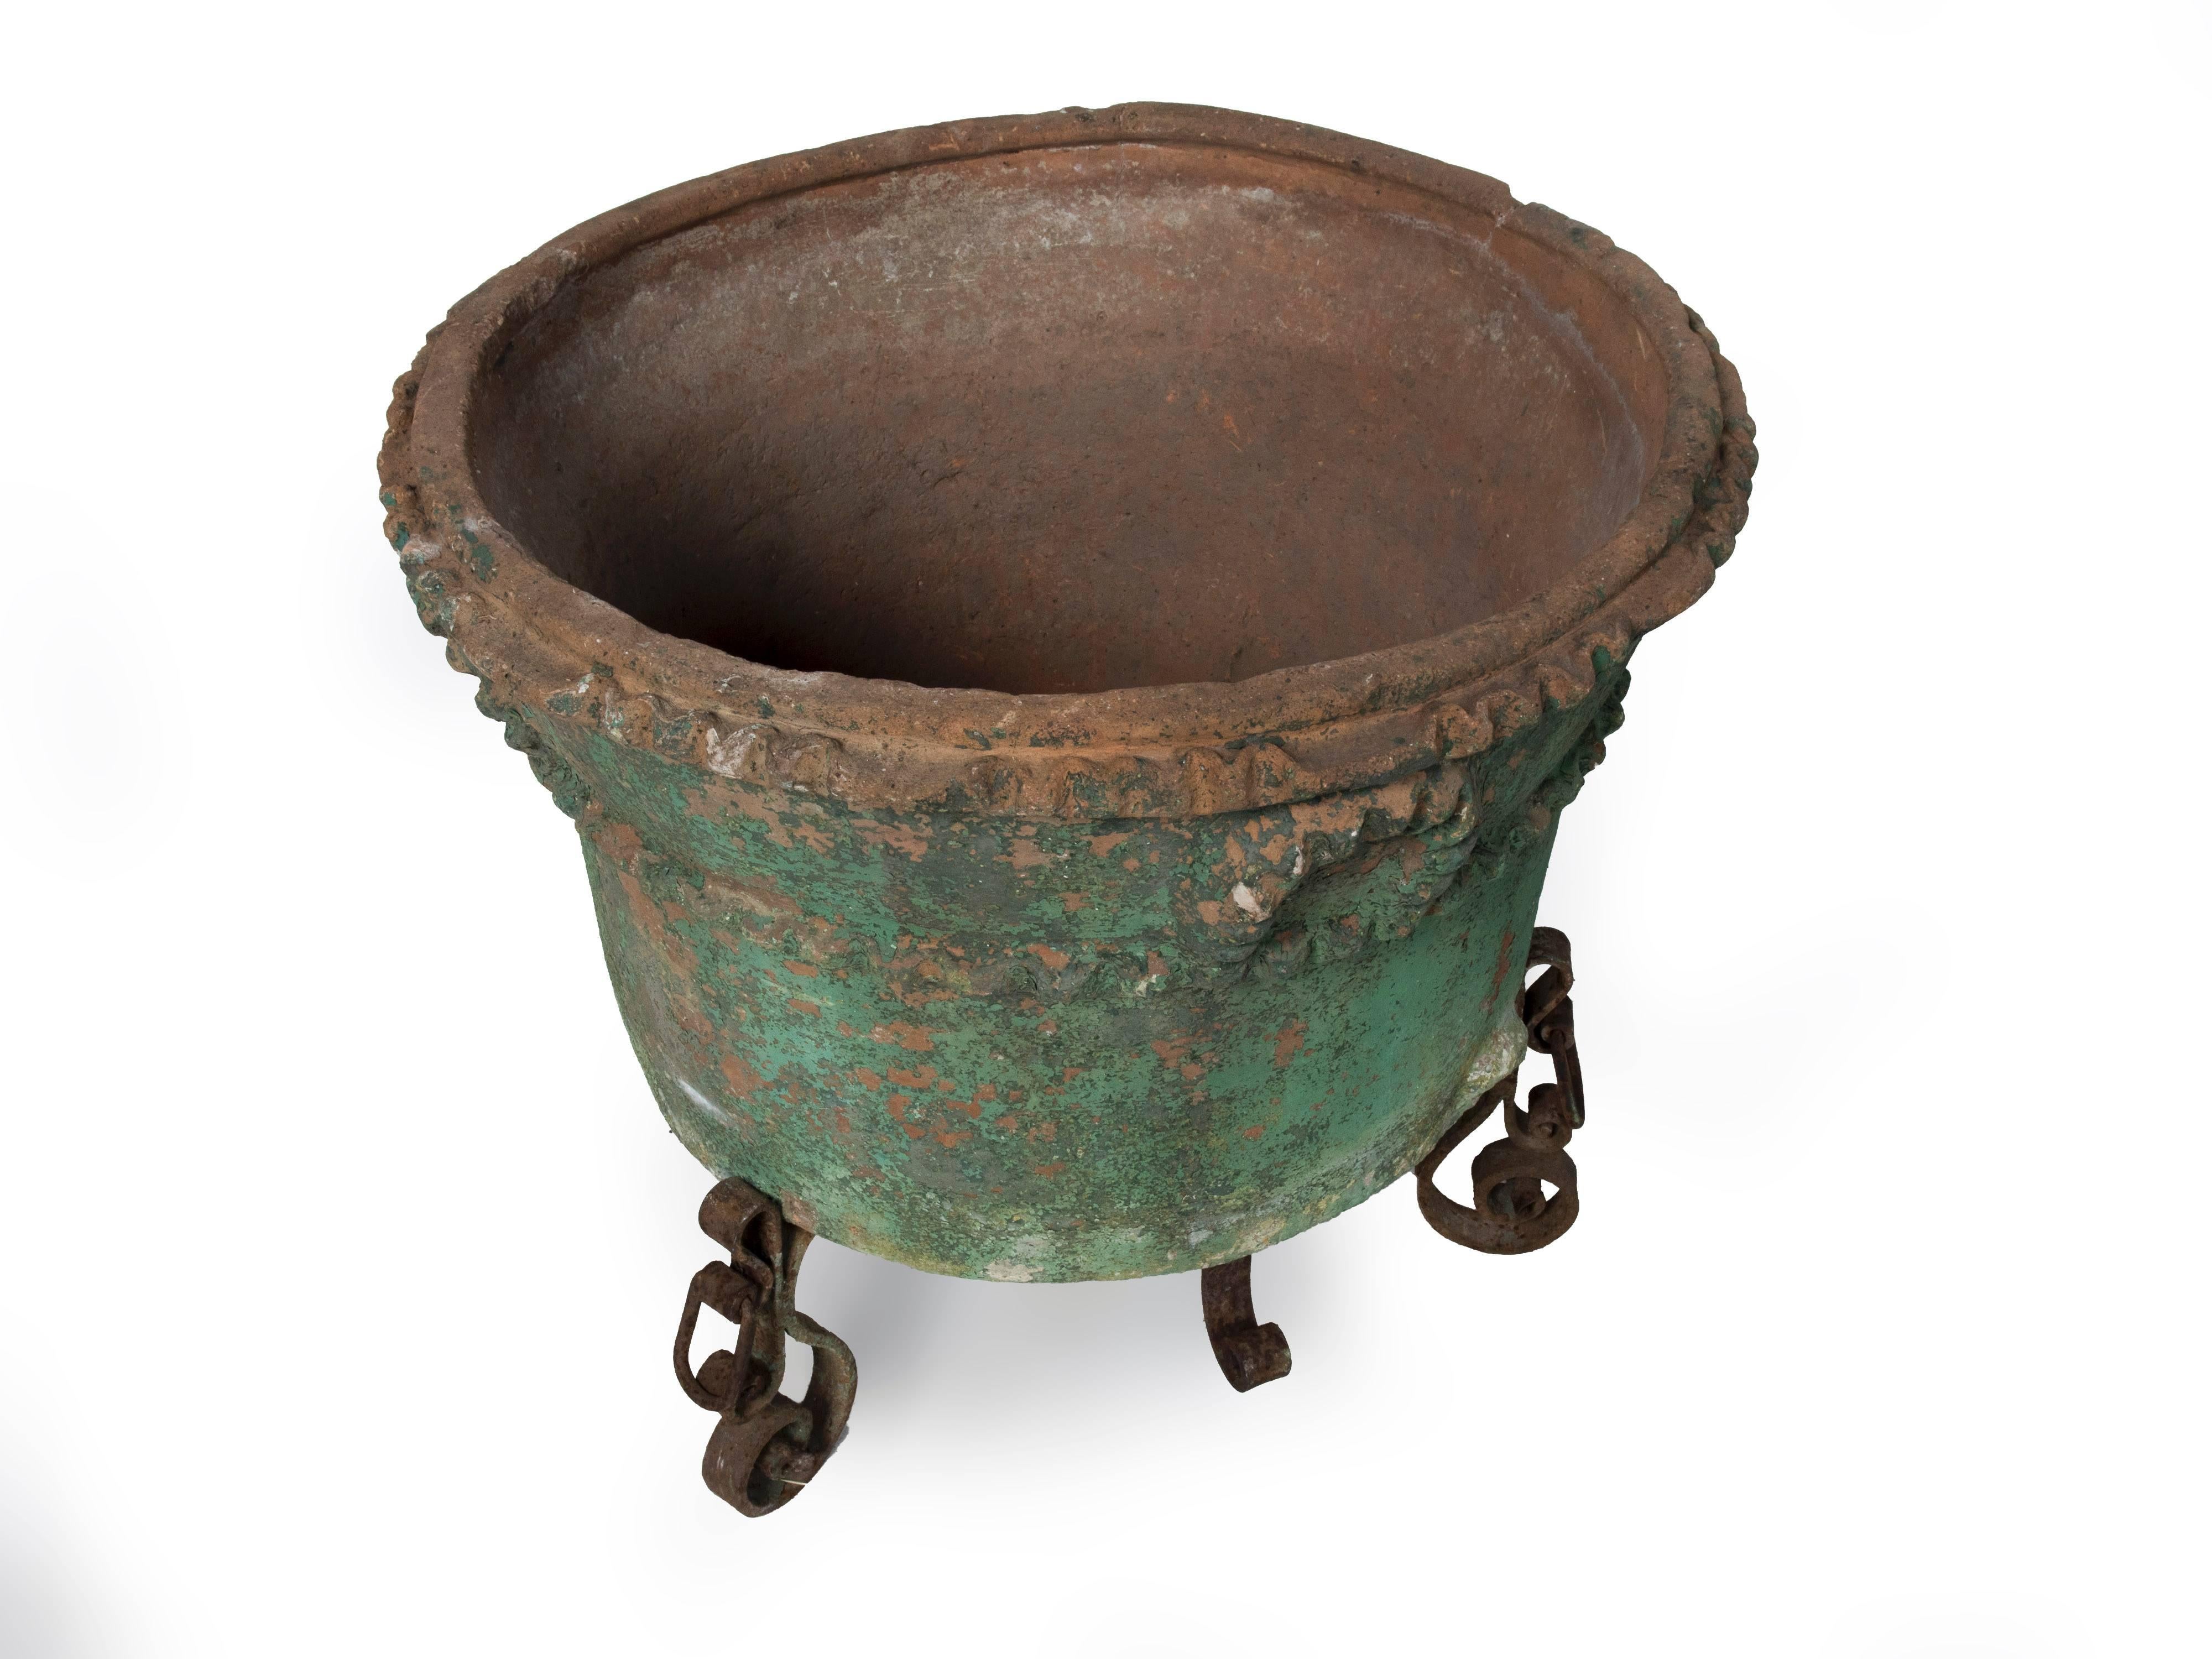 19th Century Large Painted Terra Cotta Planter with a Wrought Iron Stand